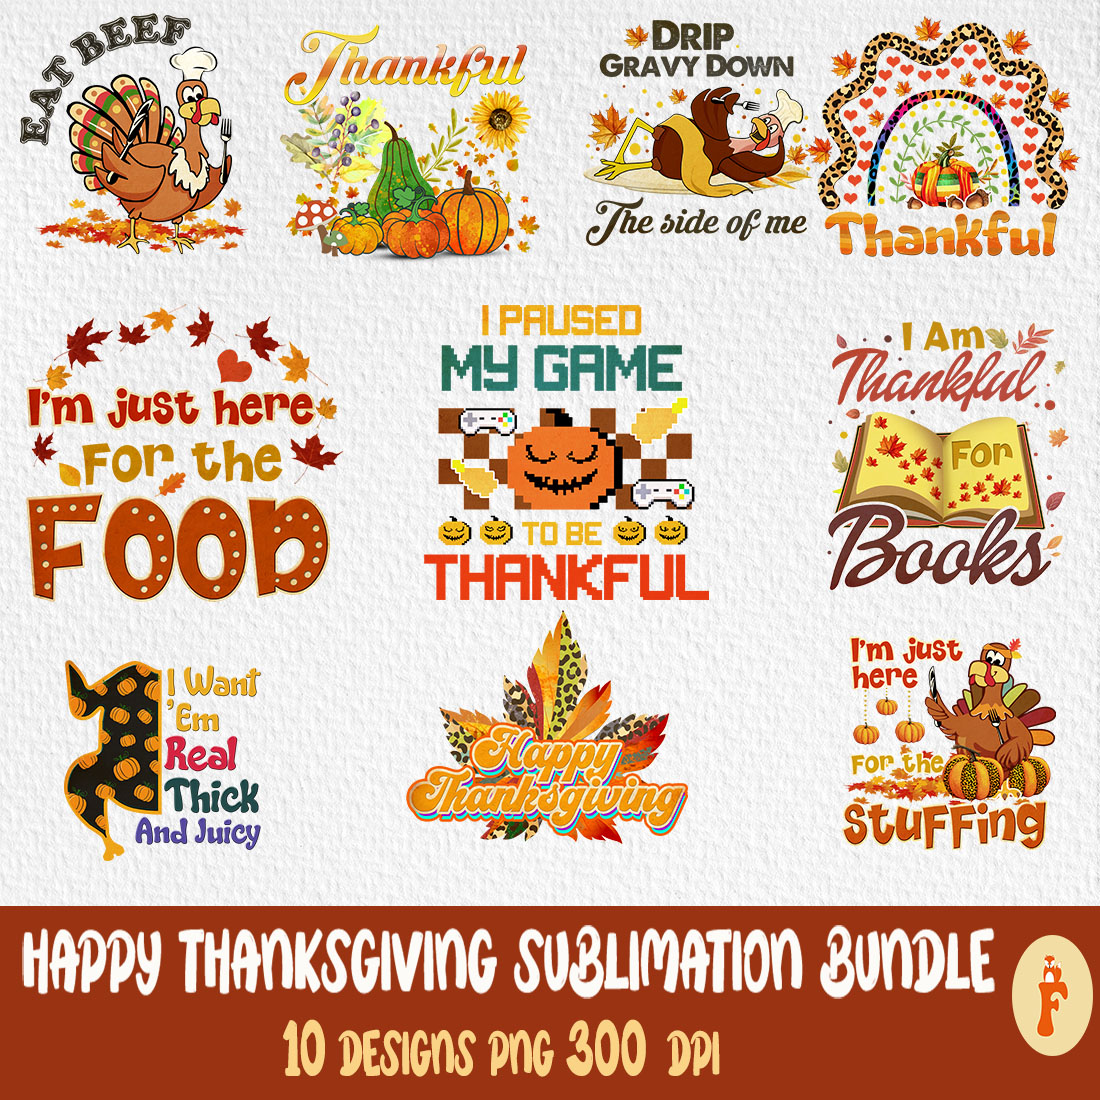 Best Happy Thanksgiving Sublimation T-Shirt Designs cover image.